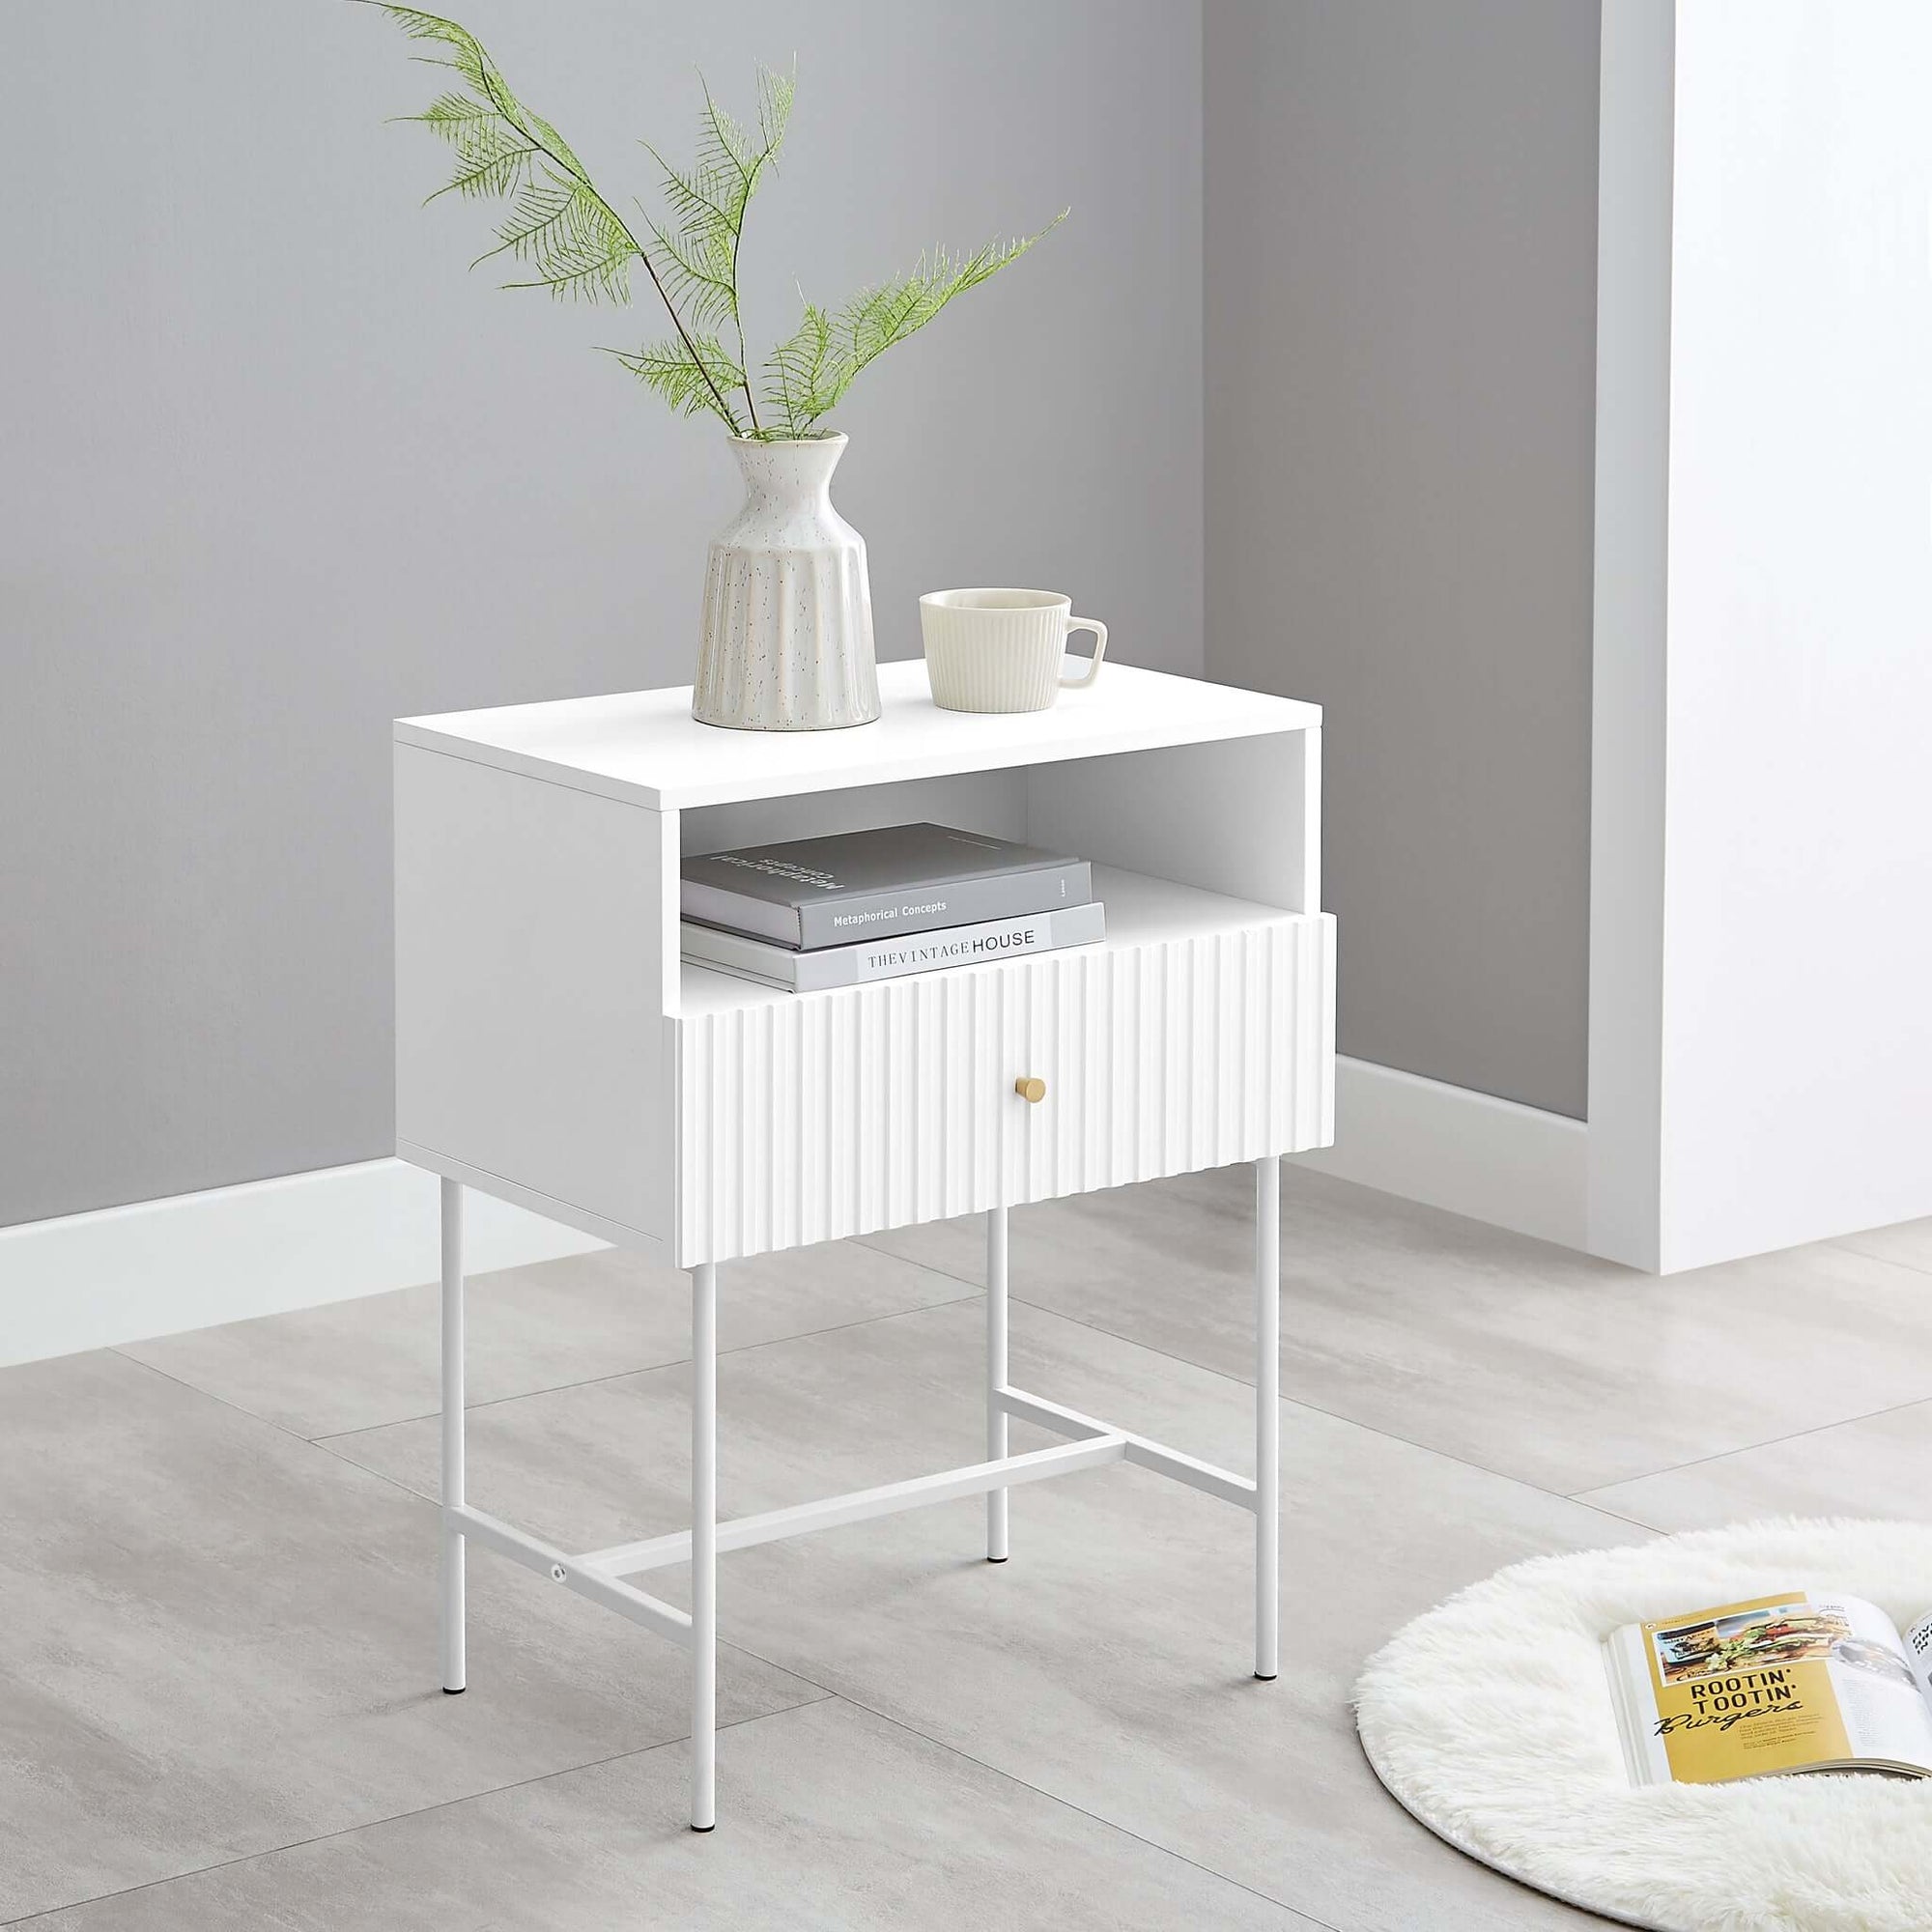 Elegant Lucia Fluted Bedside Table in Satin White-Upinteriors